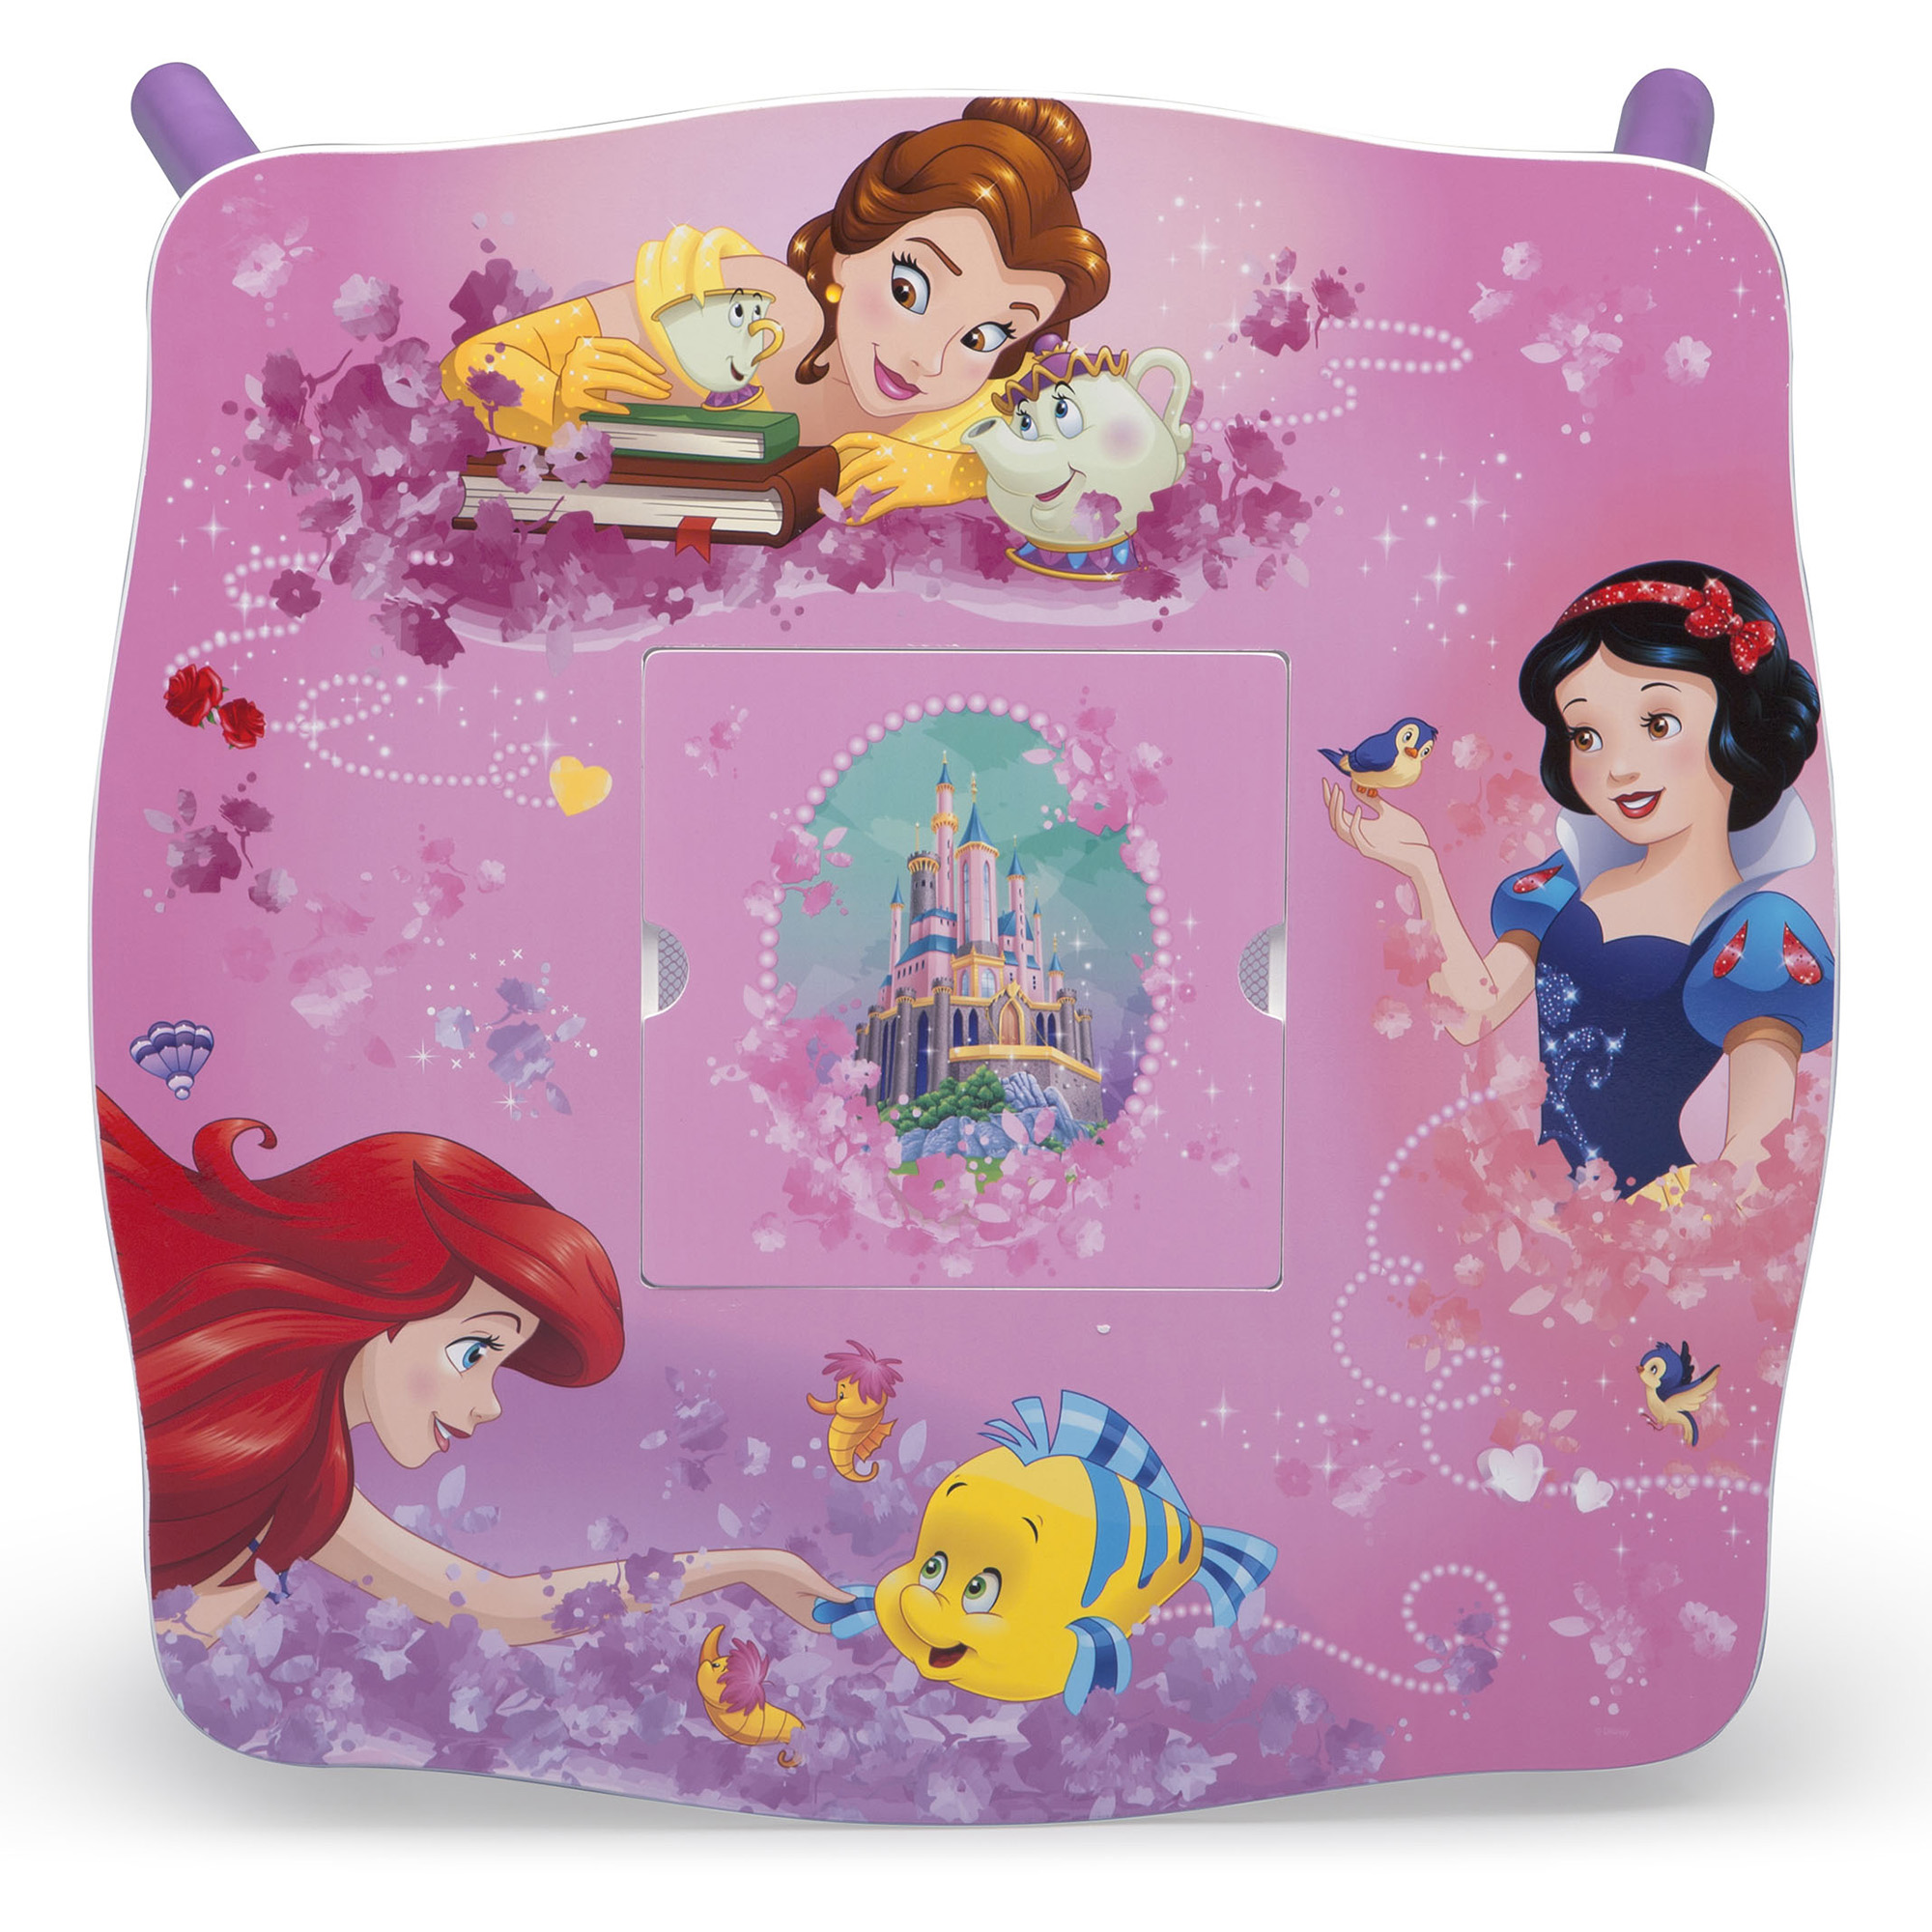 Disney Princess Wood Kids Table and Chair Set with Storage by Delta Children - image 5 of 8